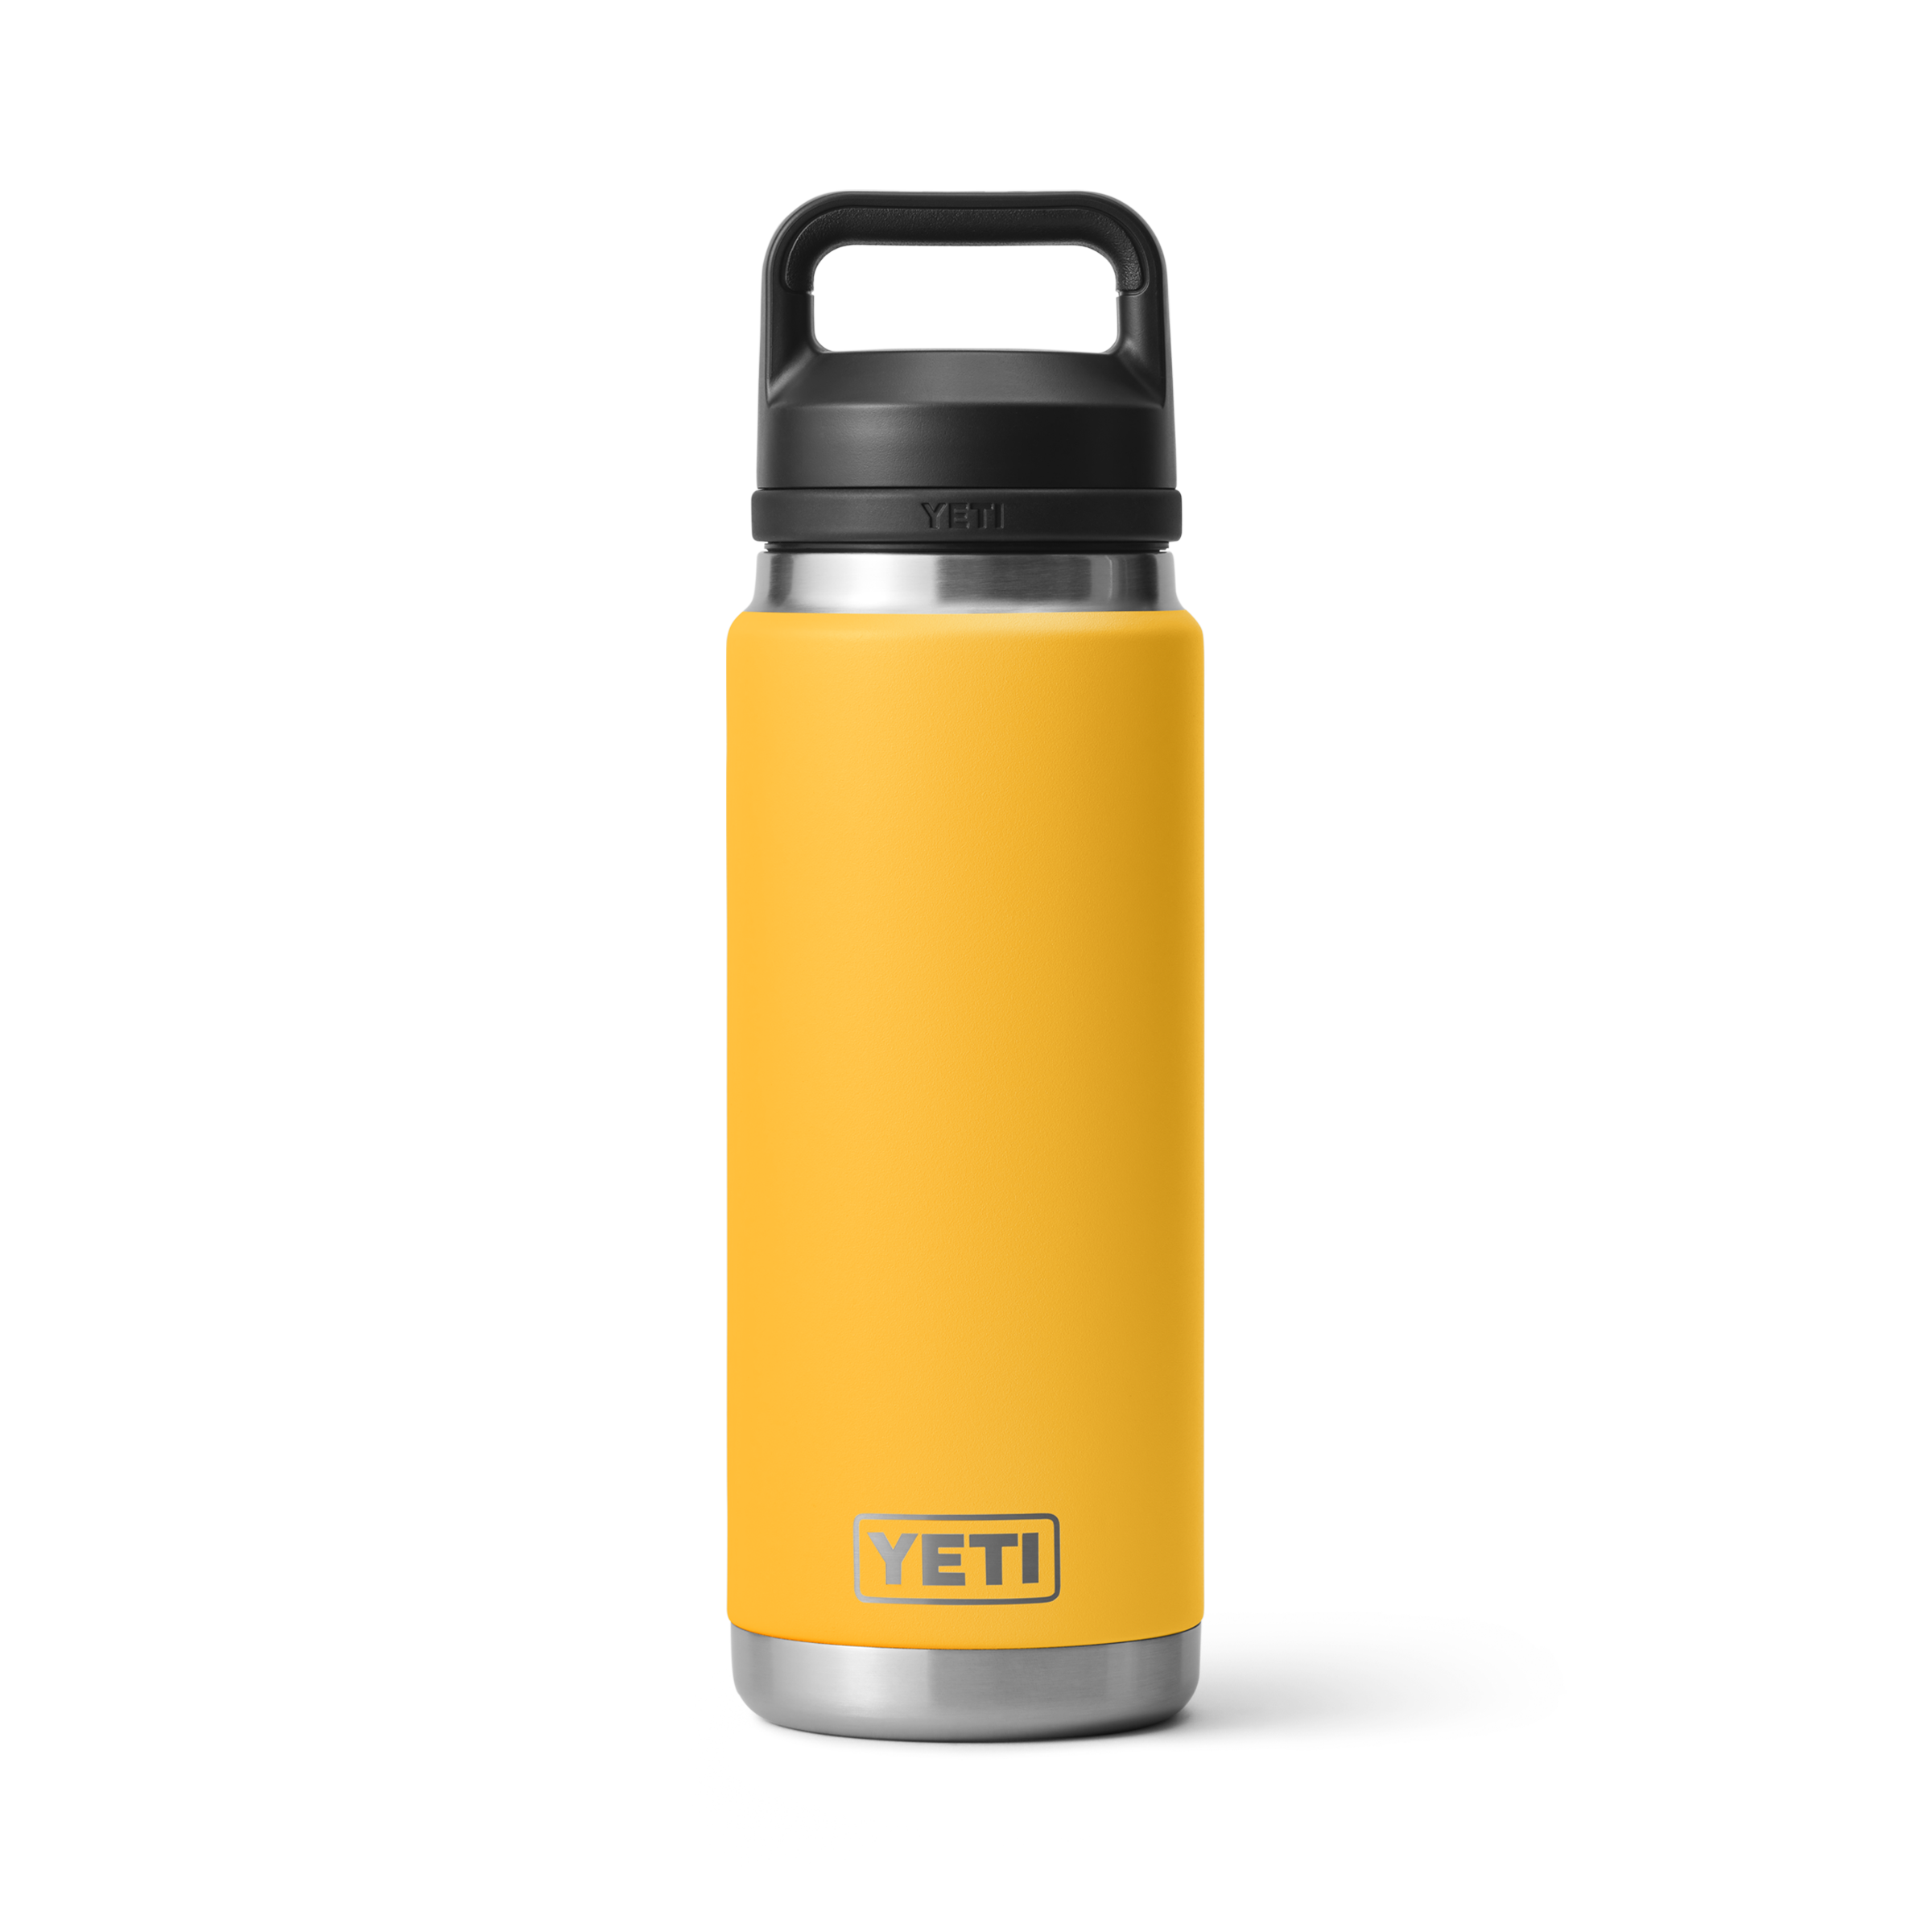 YETI Alpine Yellow Collection  Color Inspired By True Events 